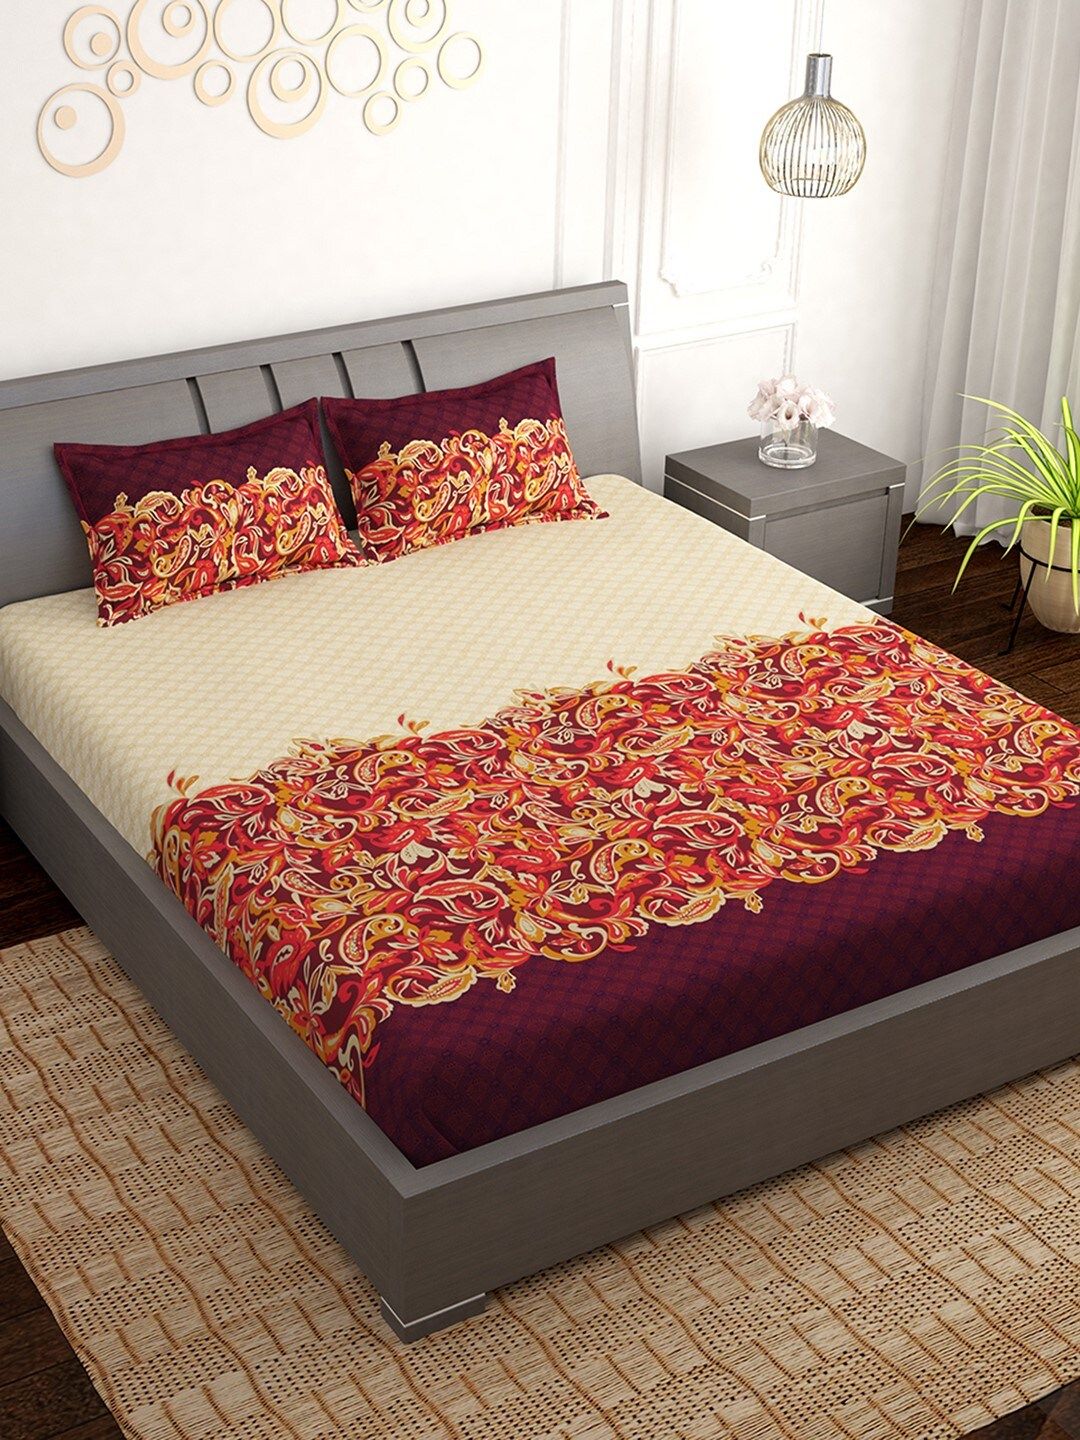 PAVO Beige & Maroon Floral 300 TC Cotton 1 King Bedsheet with 2 Pillow Covers Price in India